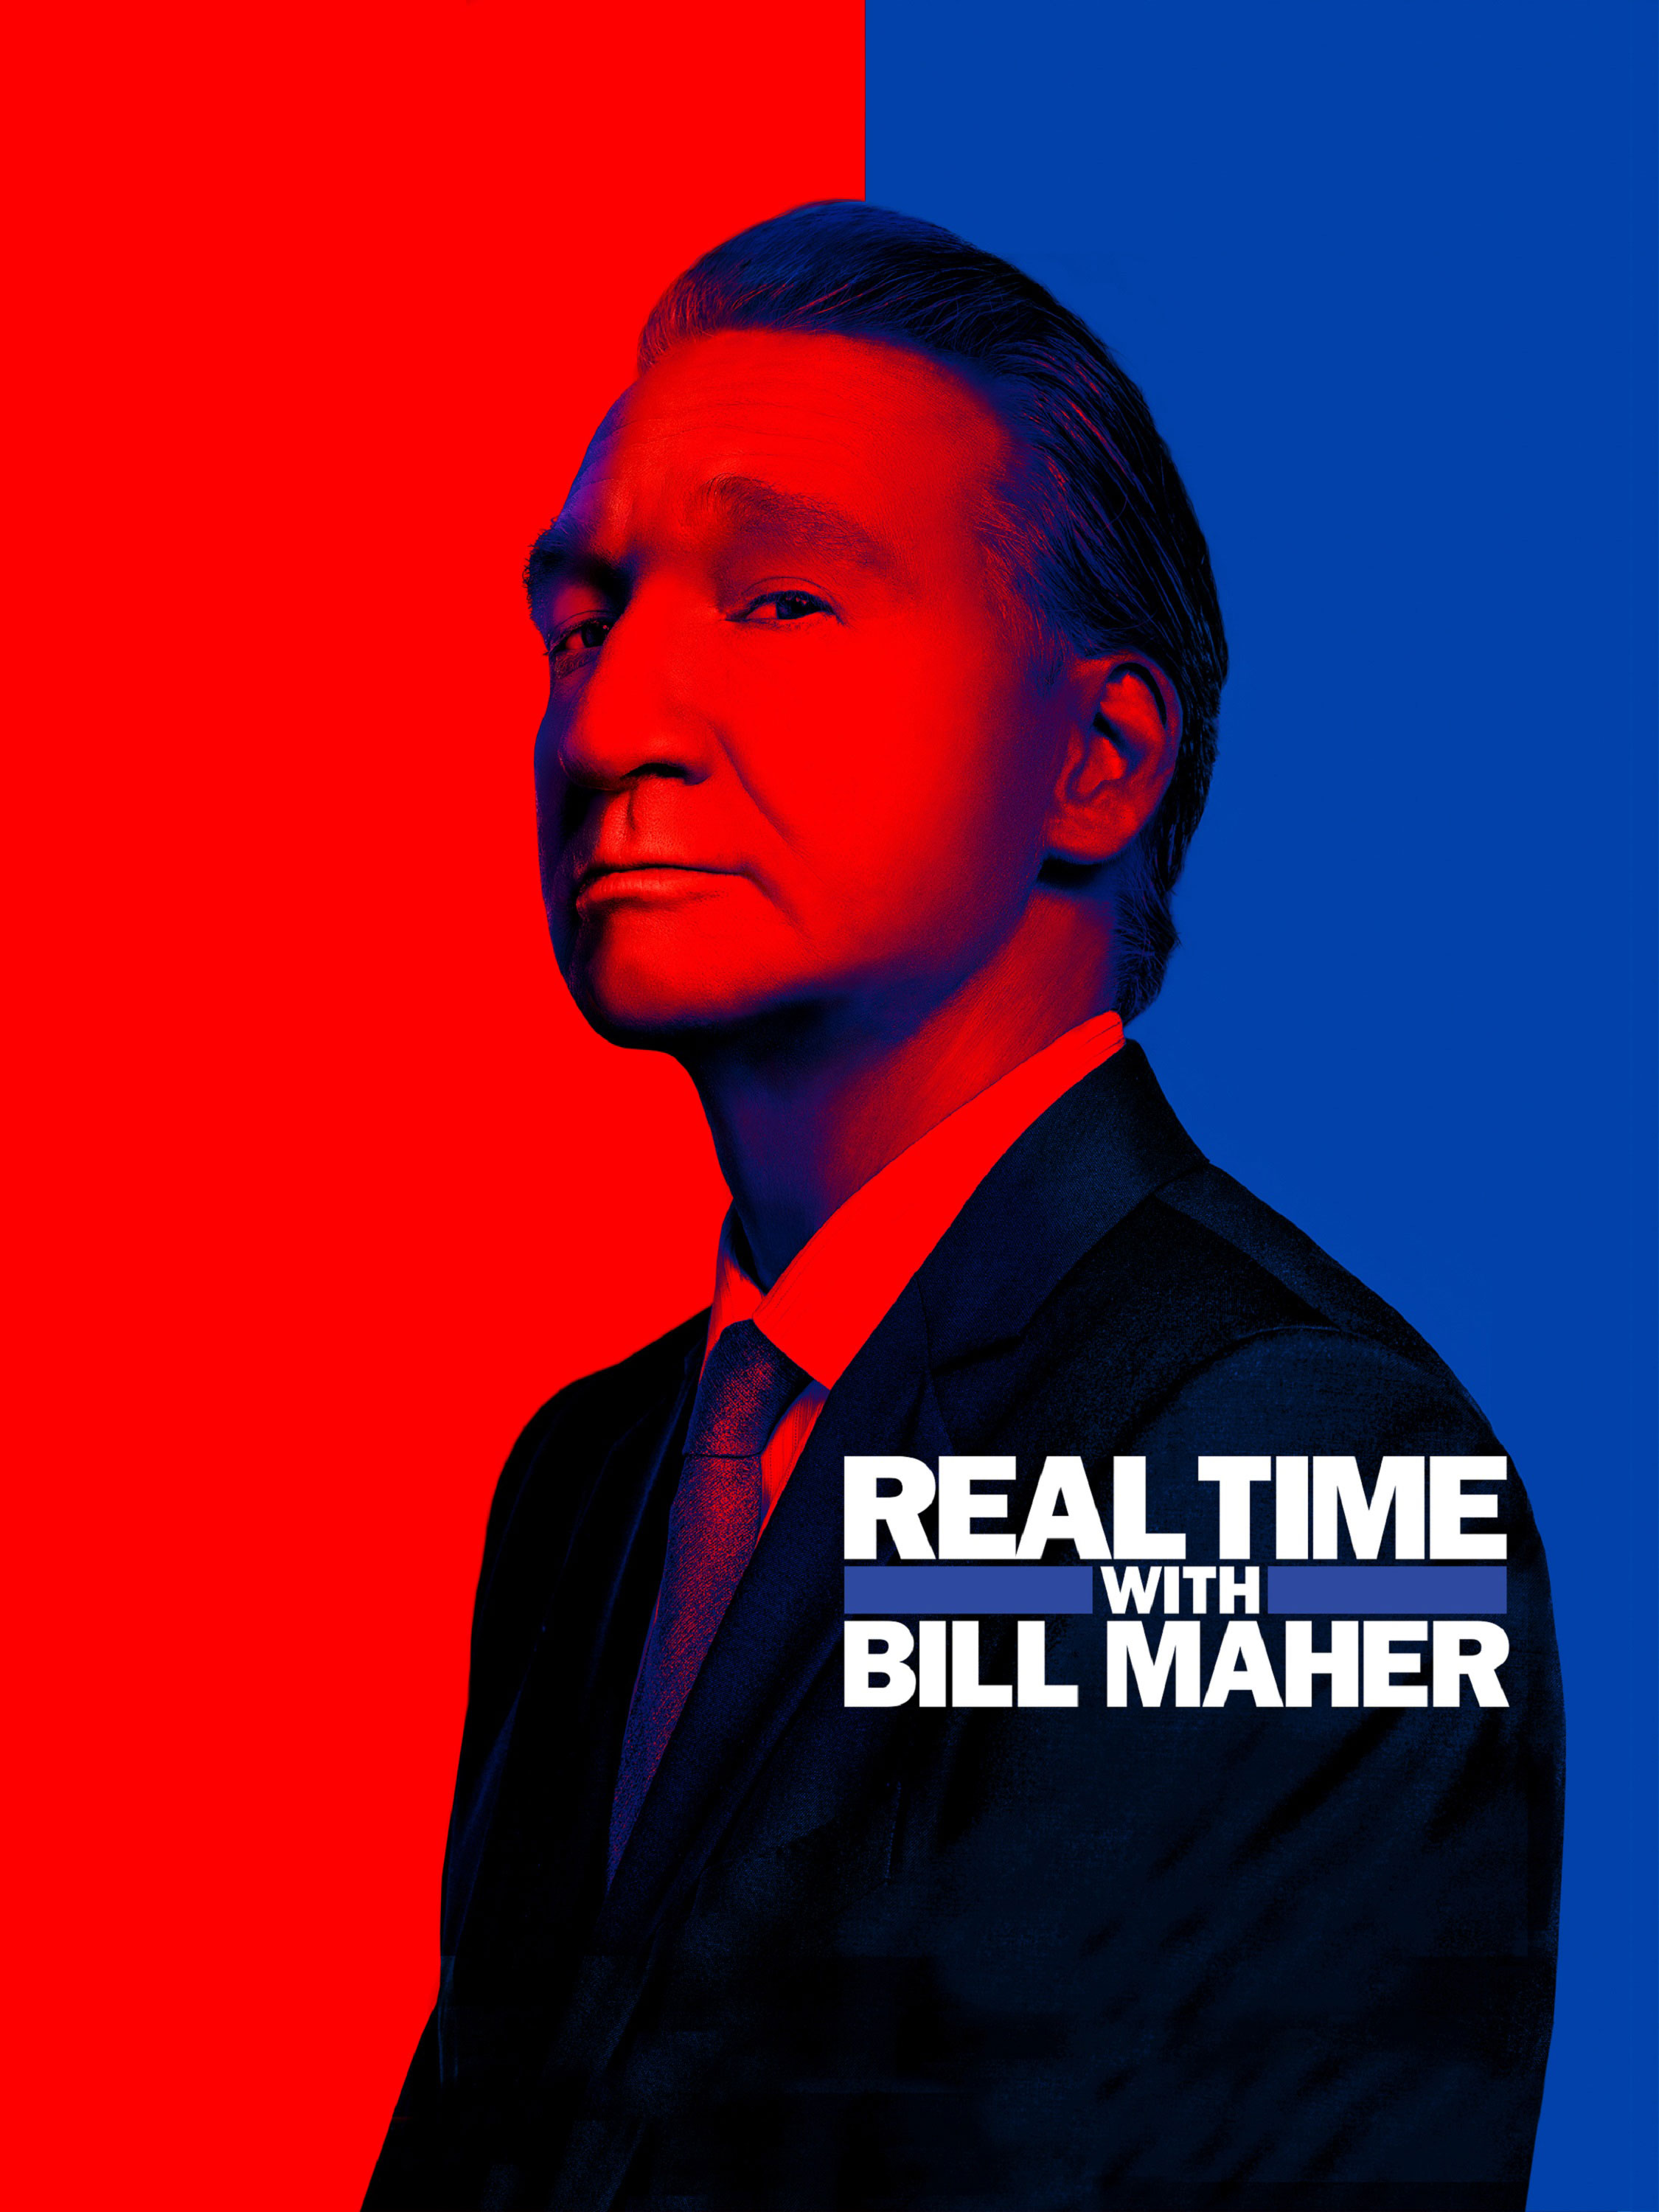 REAL TIME WITH BILL MAHER